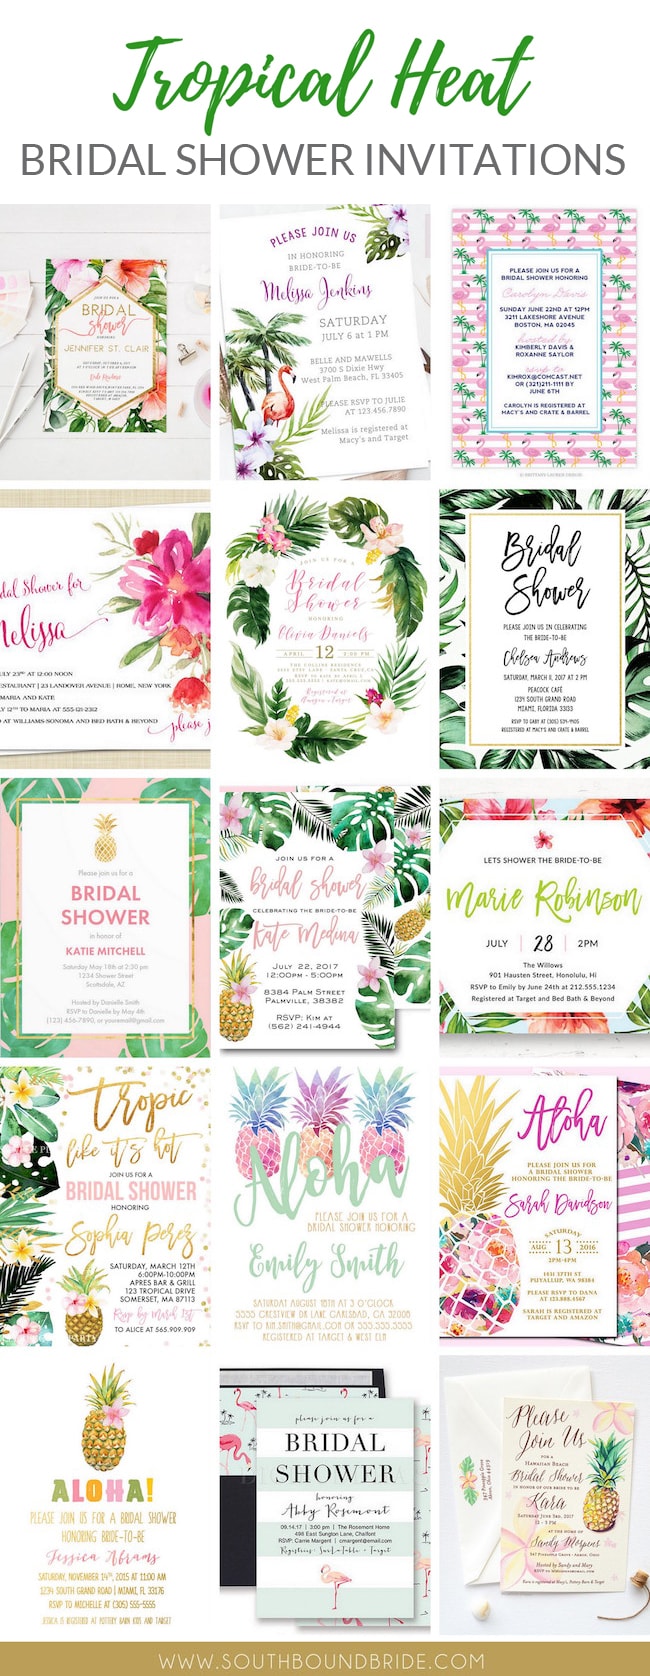 Tropical Themed Bridal Shower Invitations & Ideas | SouthBound Bride